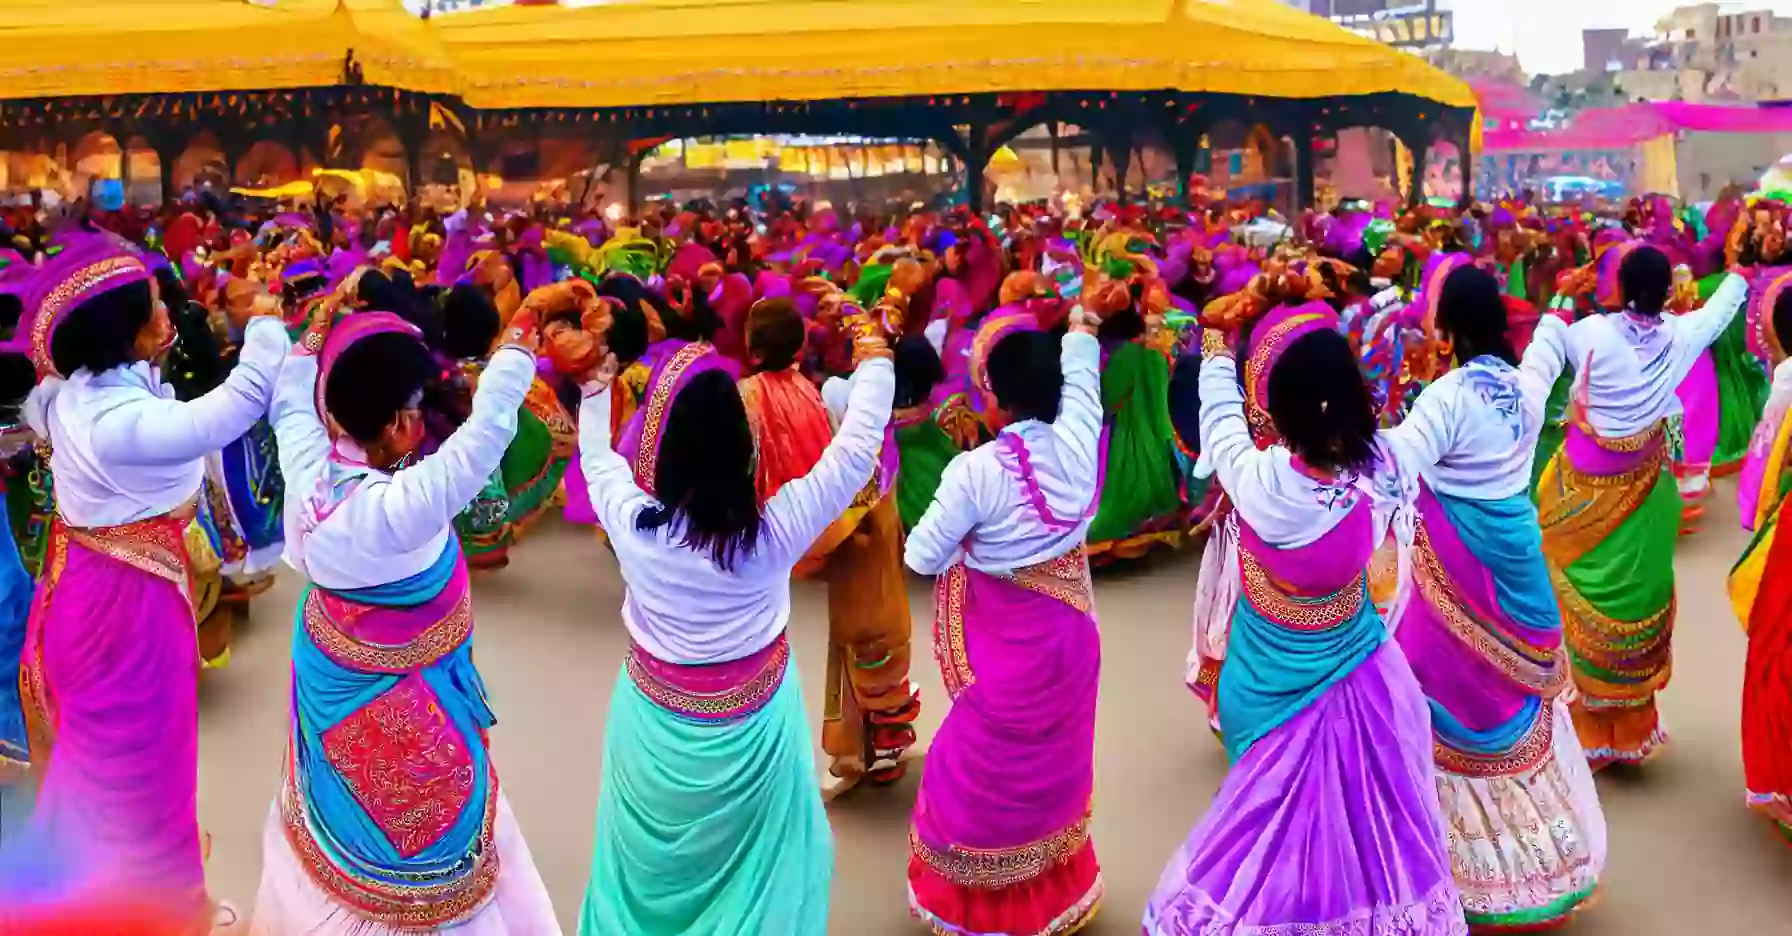 Most Famous Traditions in India: From Festivals to Dances and More!